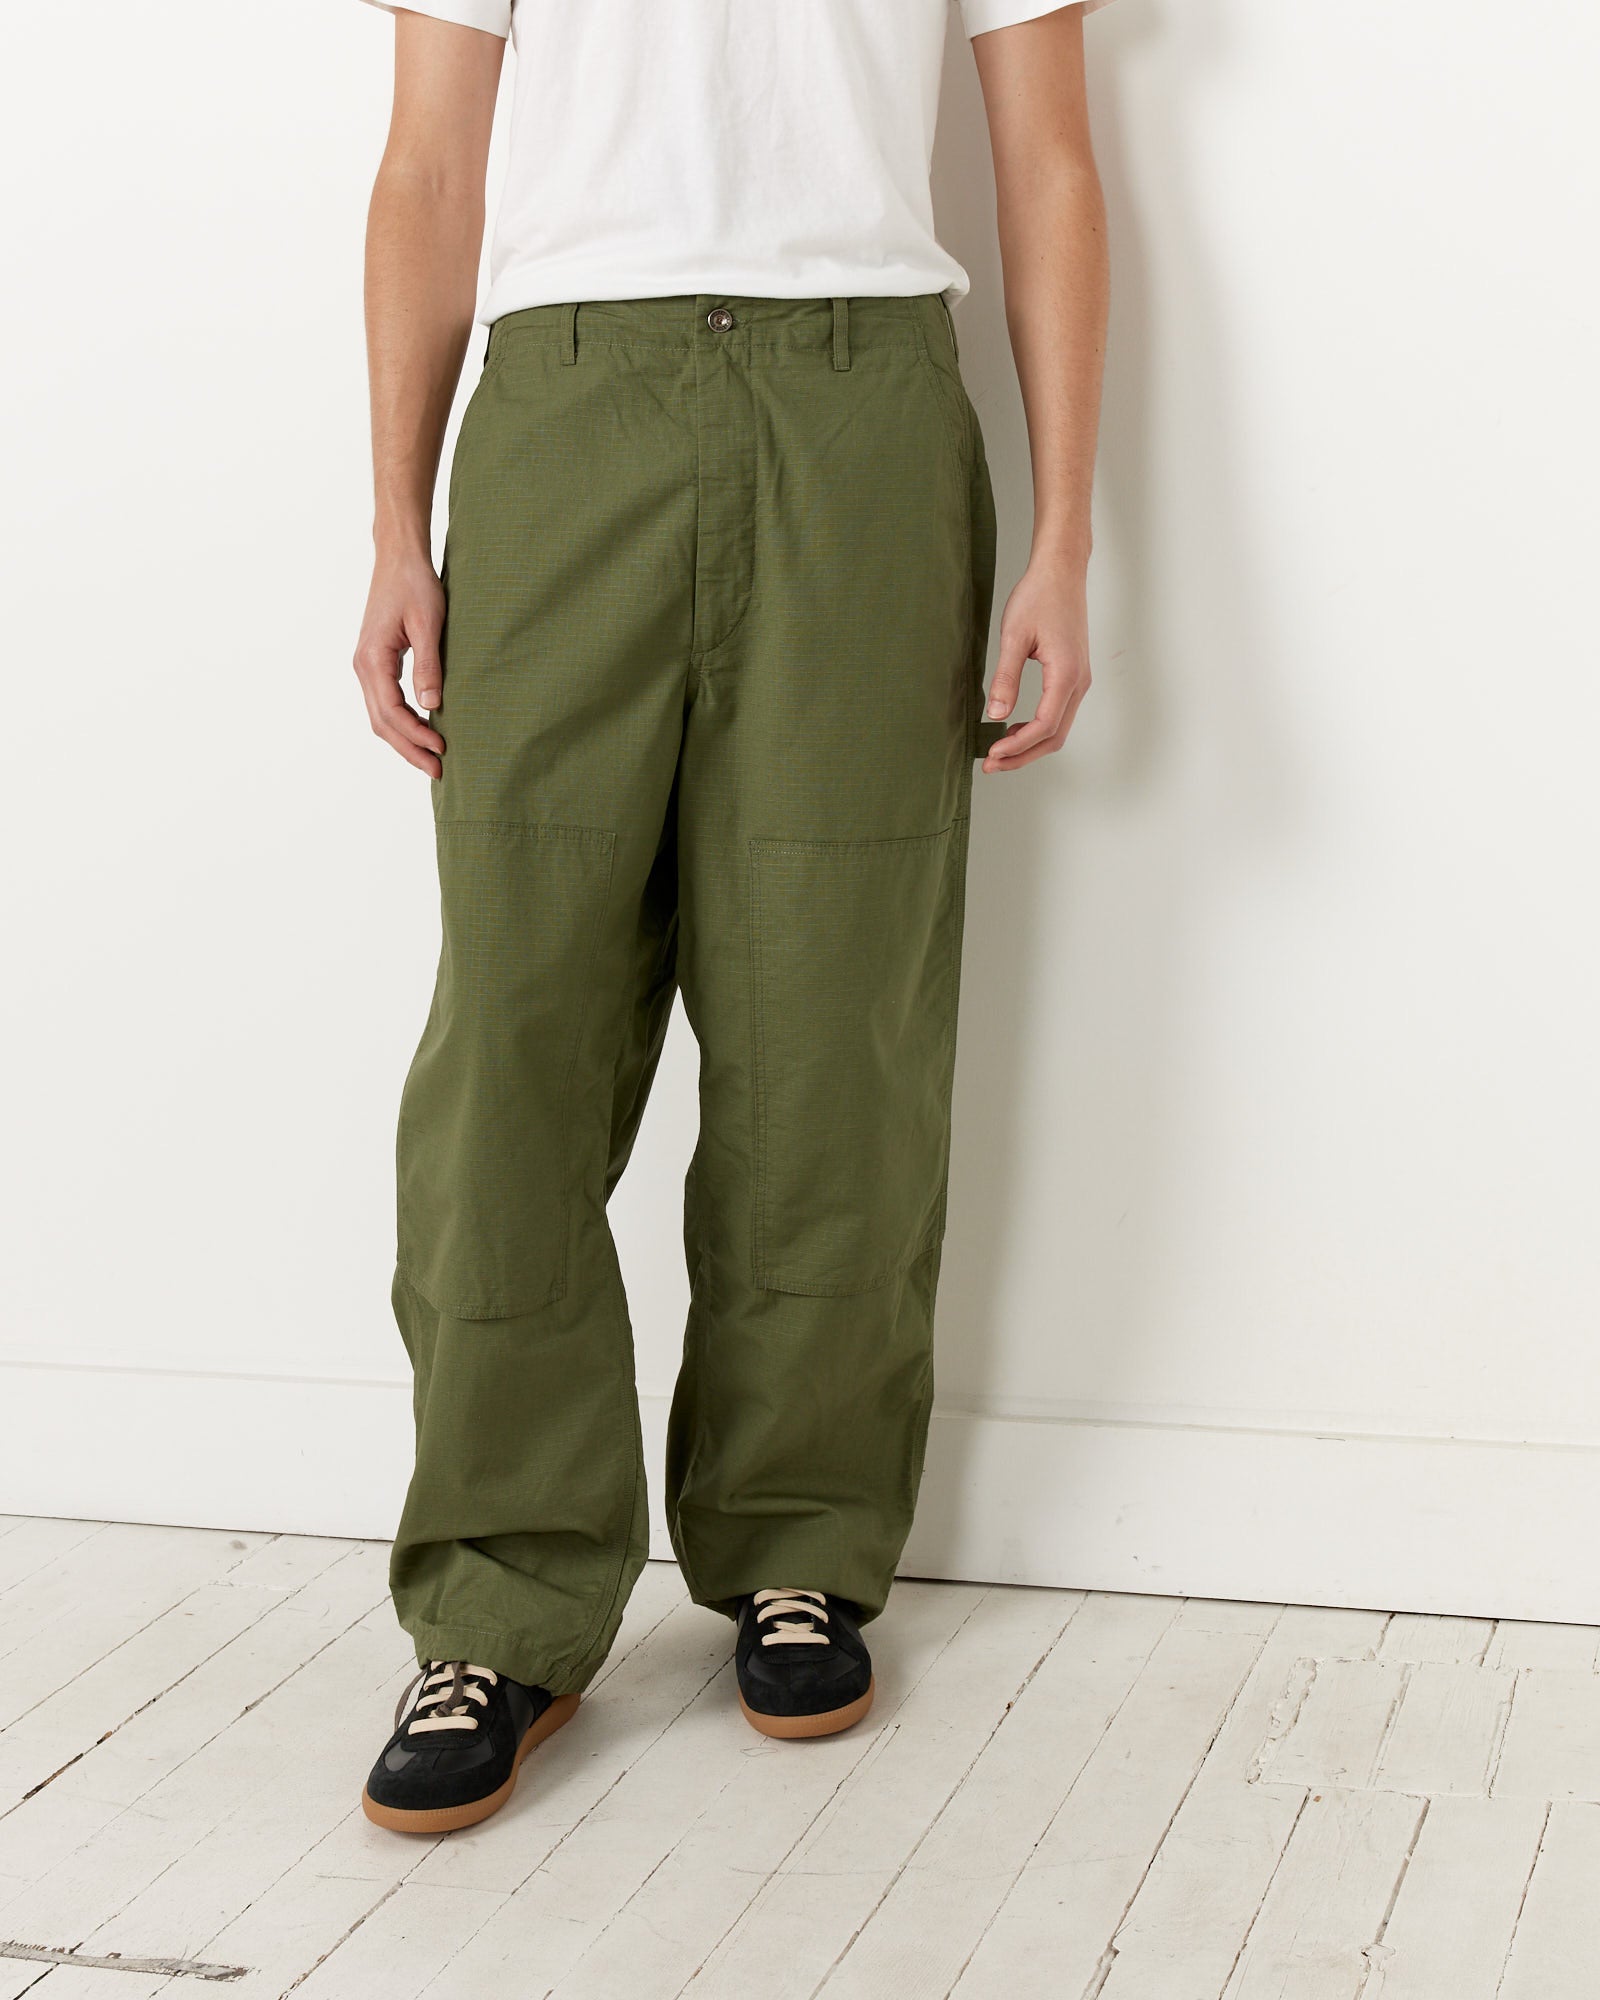 Painter Pant in Olive